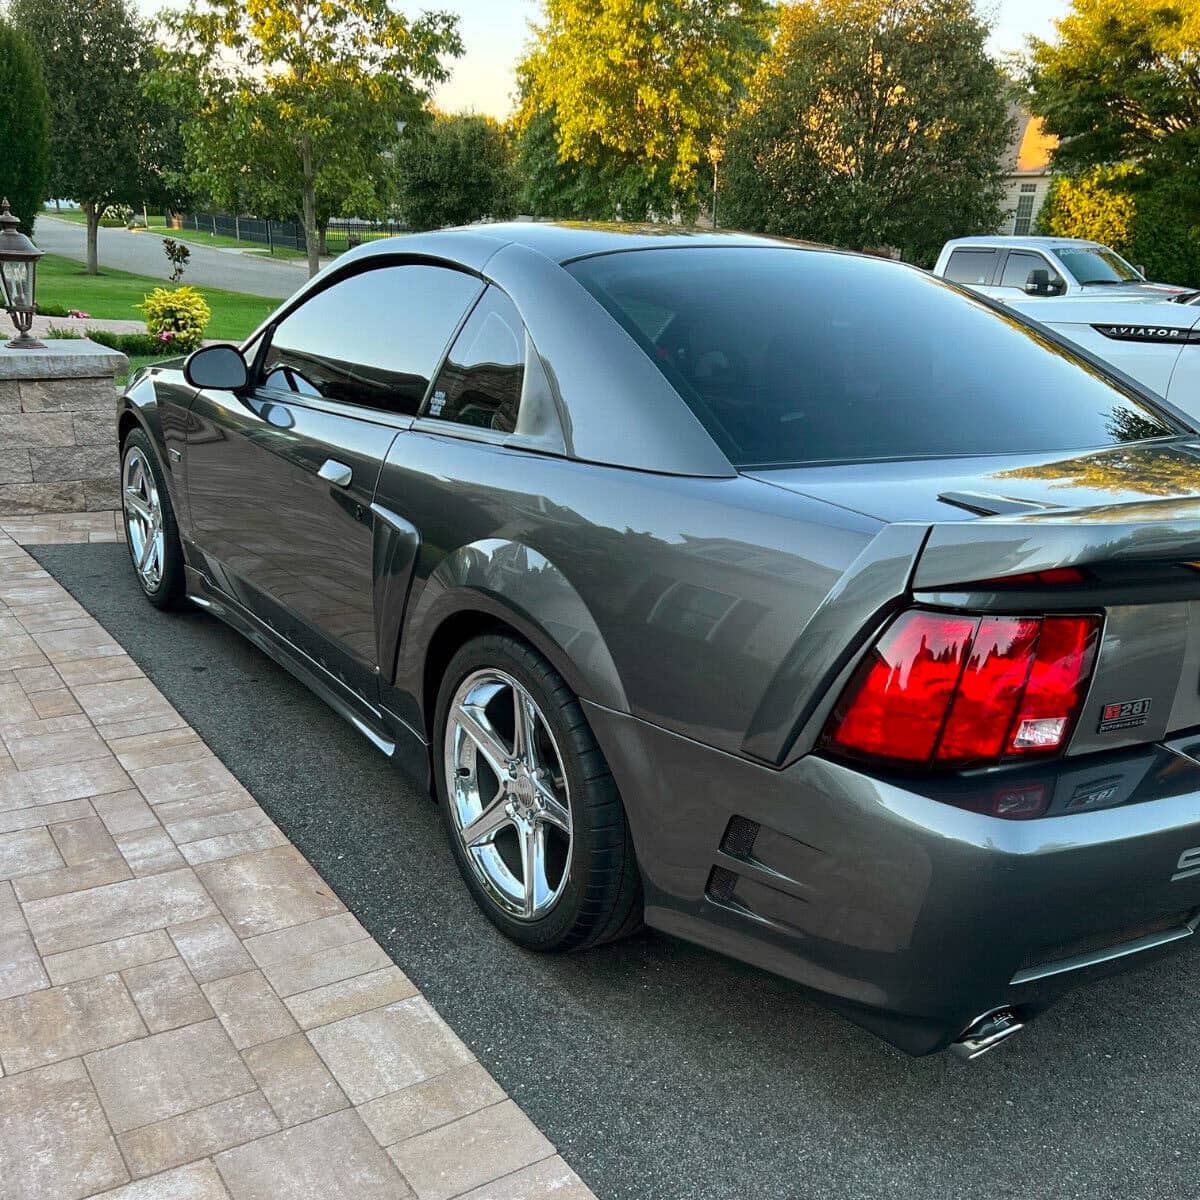 2003 Ford Mustang Saleen S281 Supercharged coupe